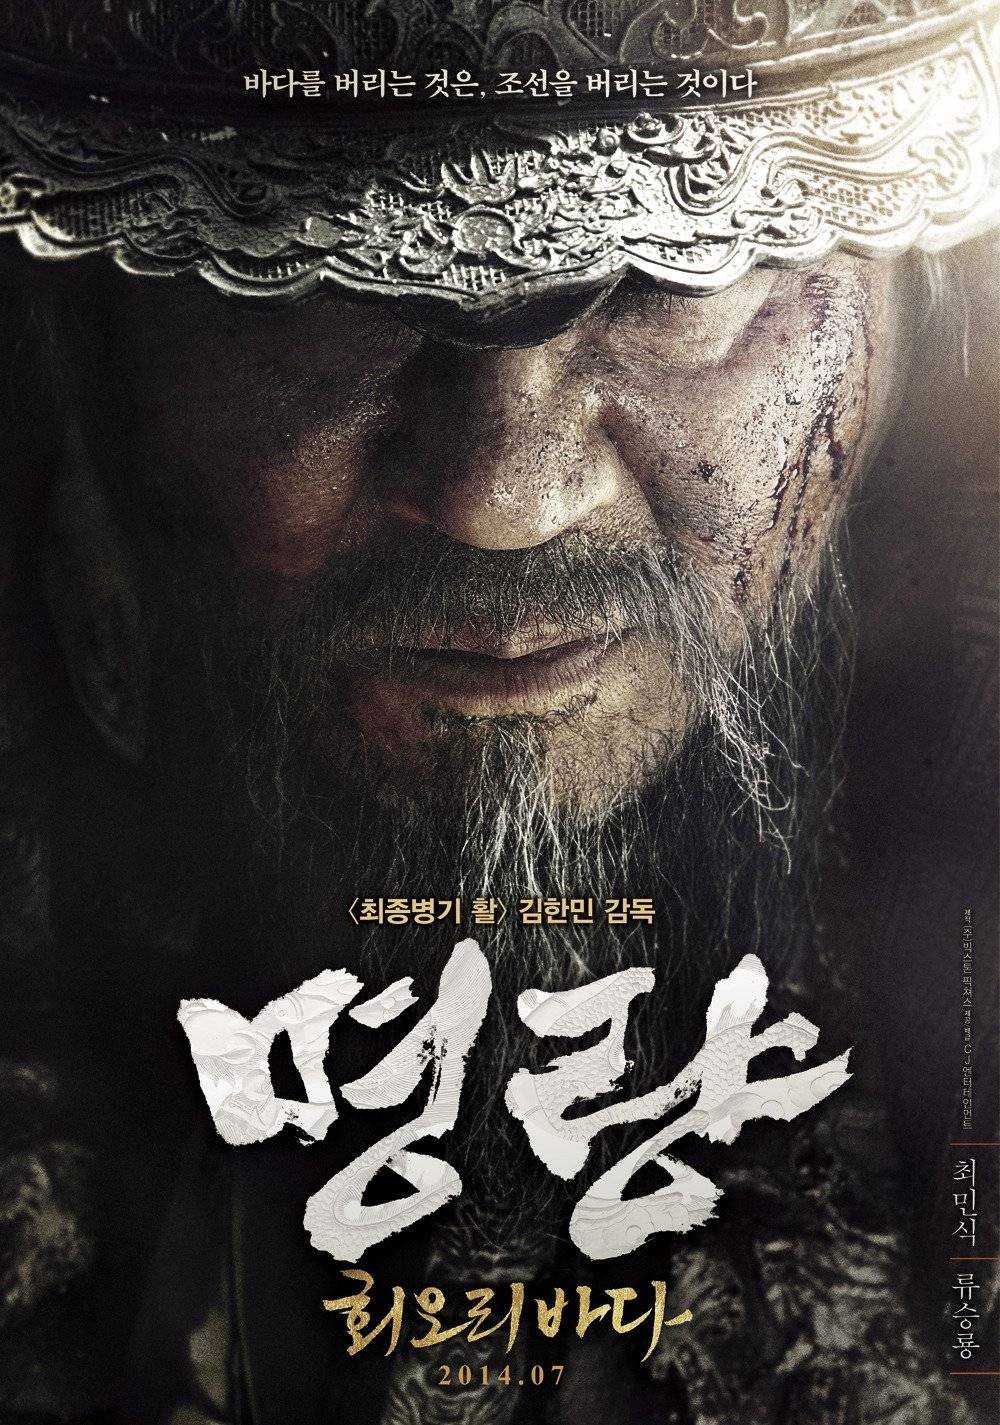 [photos] Added New Posters And Release Date For The Korean Movie